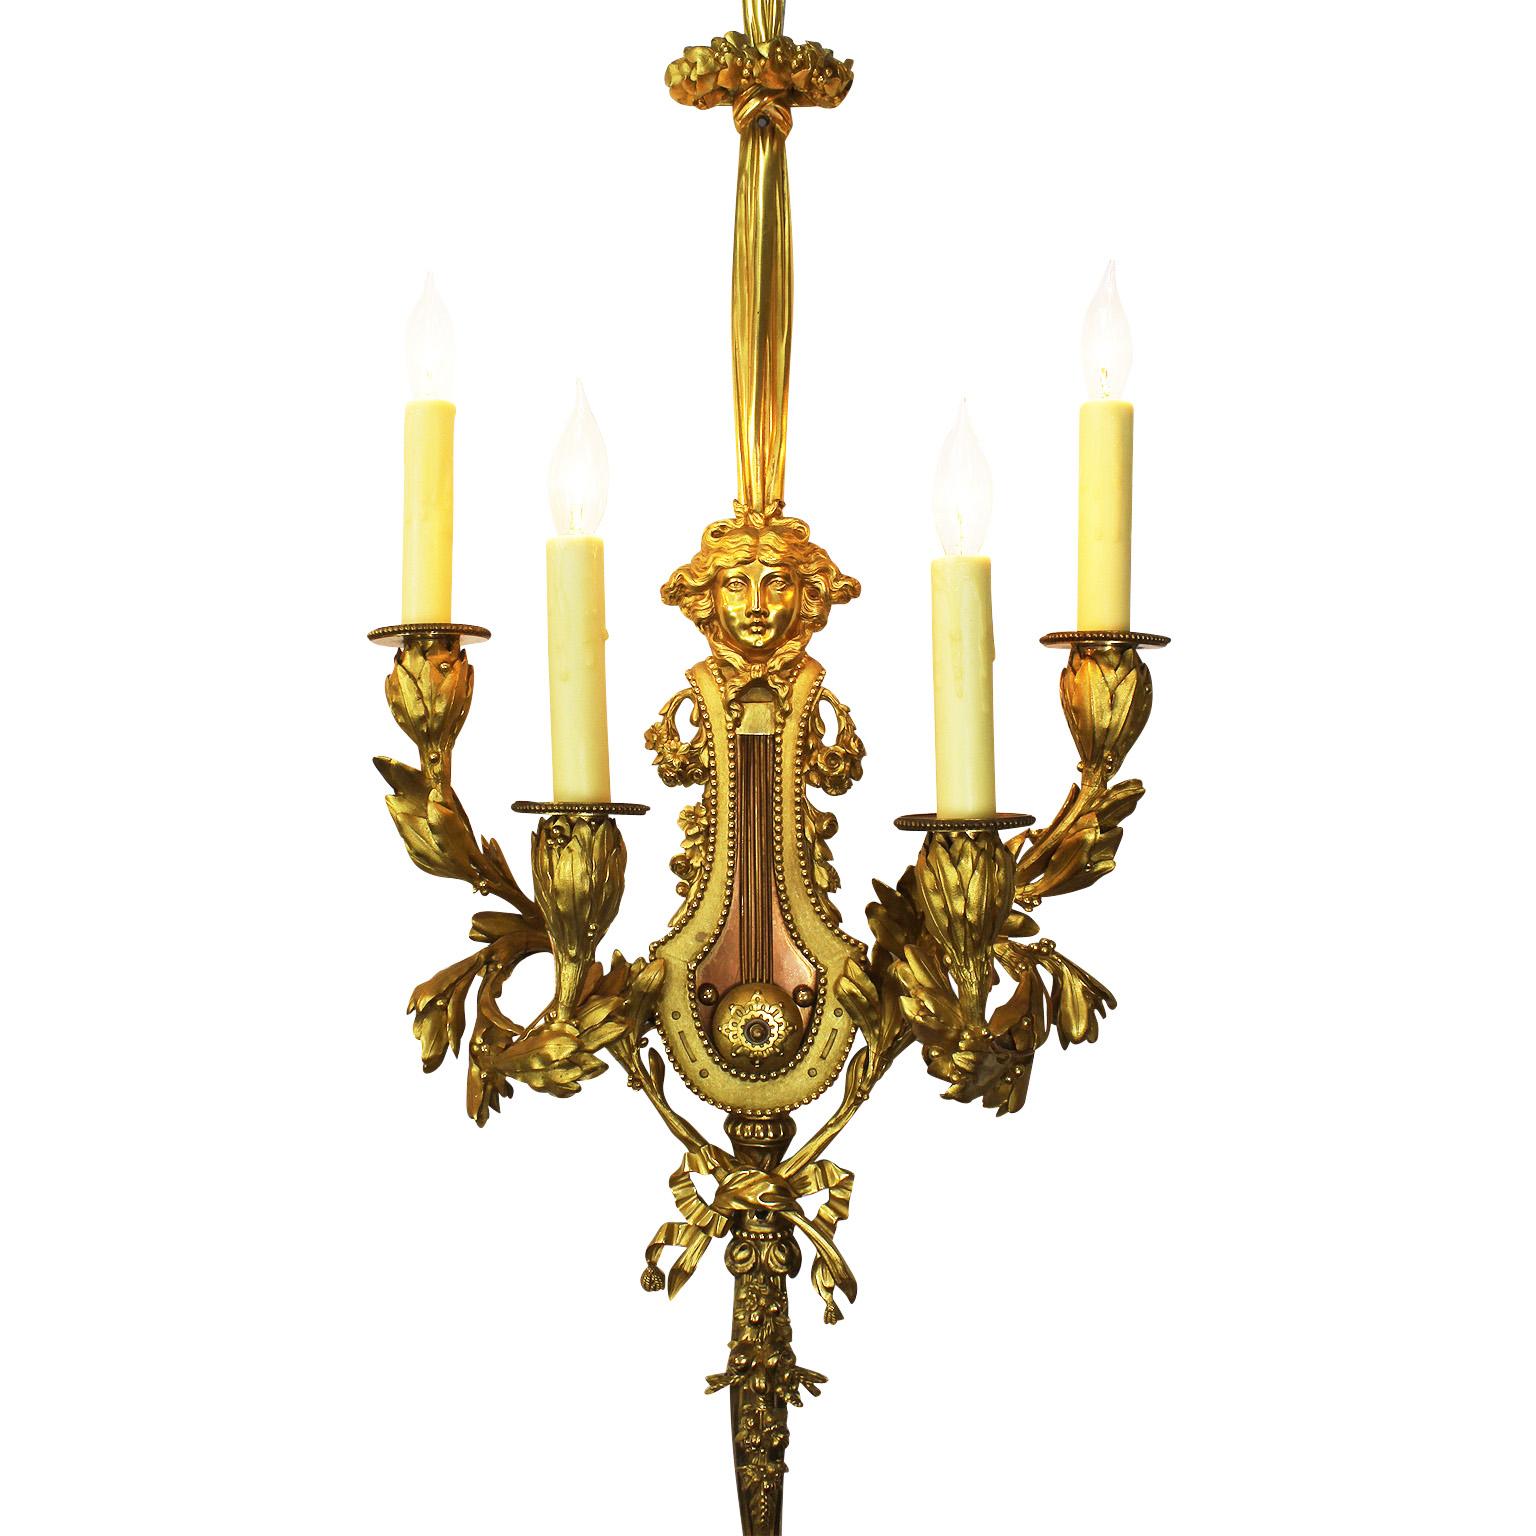 A Very Fine Pair of French 19th Century Louis XVI Style Gilt-Bronze Four-Light Wall Appliques (Wall lights - Wall sconces) after the model by Pierre Gouthière (French, 1732–1813) attributed to Henry Dasson (French, 1925-1896). One wall light